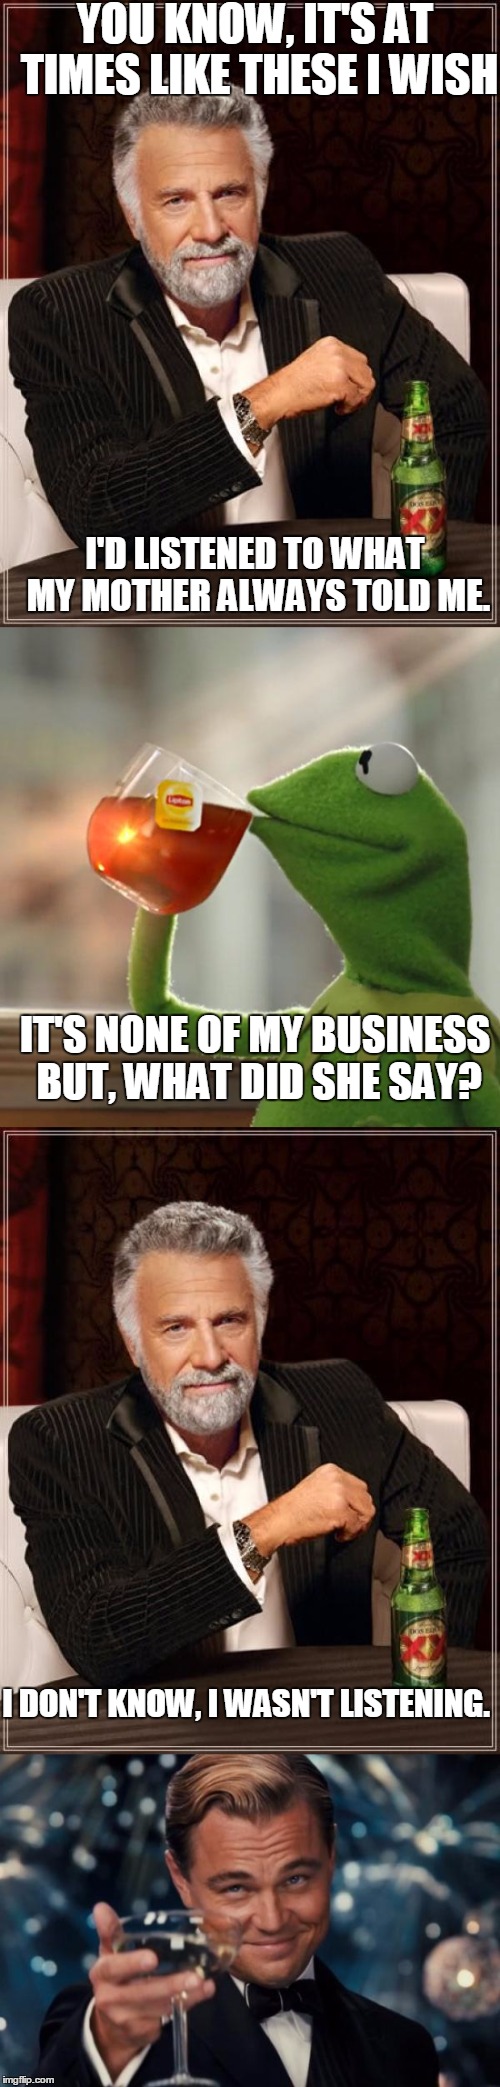 YOU KNOW, IT'S AT TIMES LIKE THESE I WISH; I'D LISTENED TO WHAT MY MOTHER ALWAYS TOLD ME. IT'S NONE OF MY BUSINESS BUT, WHAT DID SHE SAY? I DON'T KNOW, I WASN'T LISTENING. | image tagged in the most interesting man in the world,kermit the frog,leonardo dicaprio cheers | made w/ Imgflip meme maker